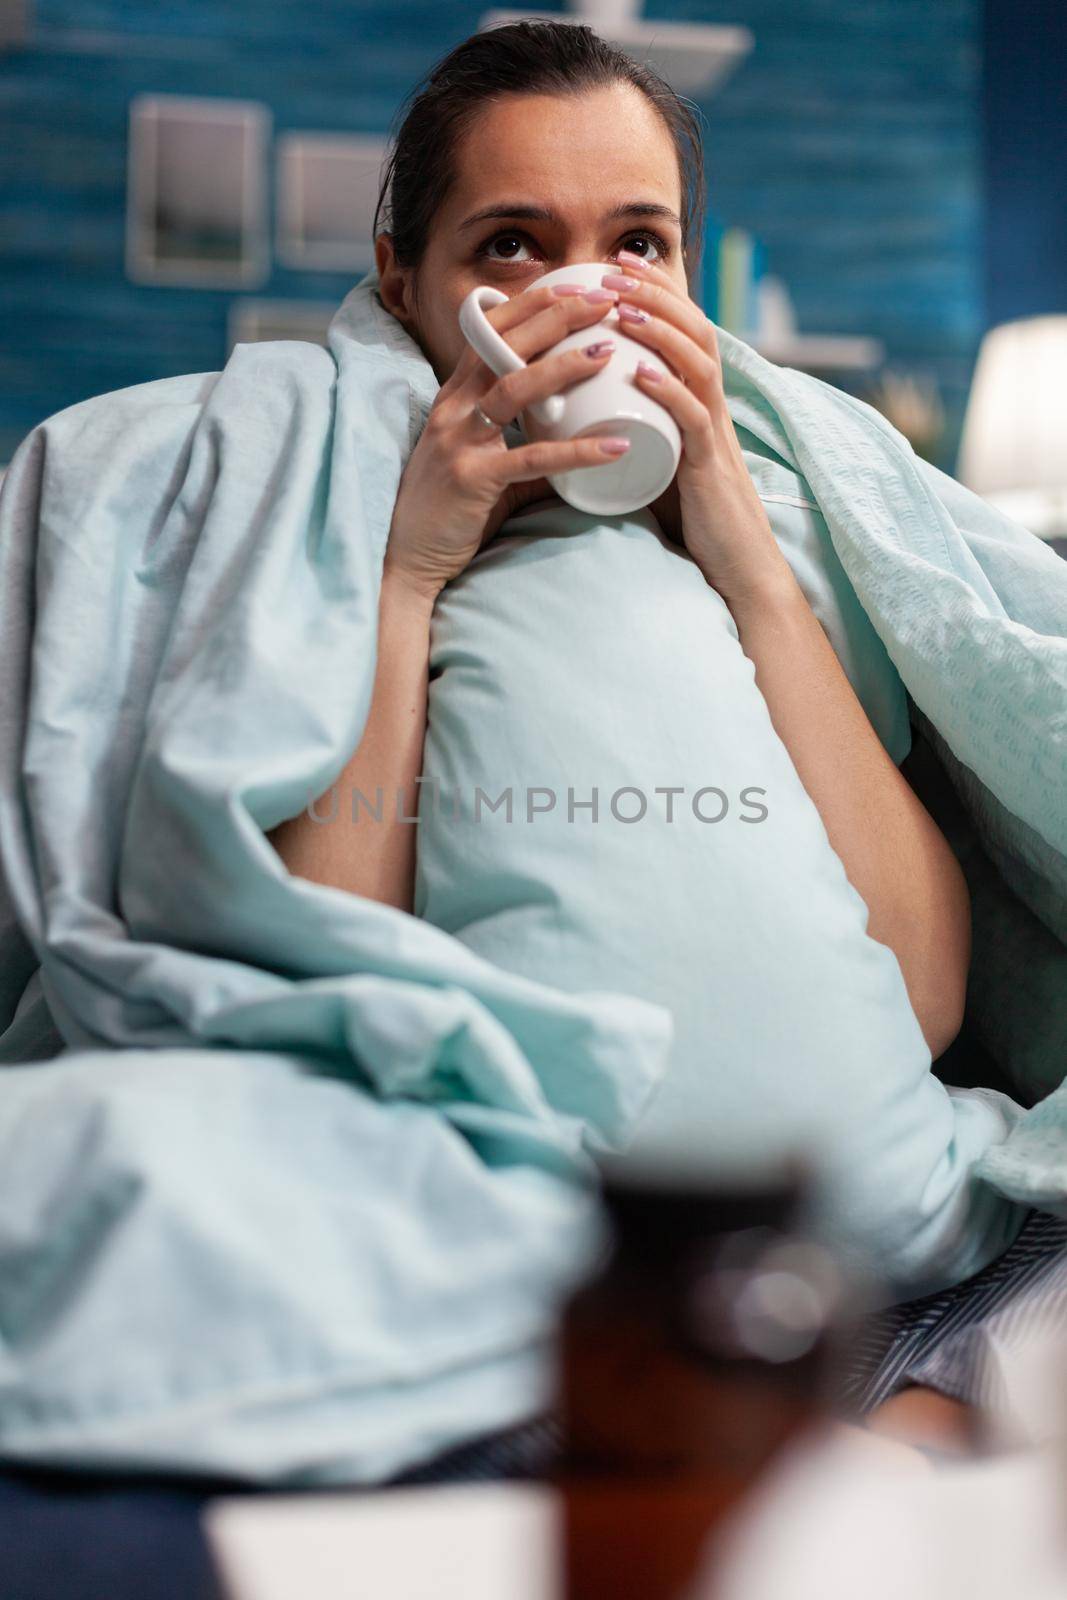 Sick woman at home resting with cup of tea on sofa wrapped in blanket. Unwell young adult with cold flu disease infection fever temperature headache covid 19 virus symptoms